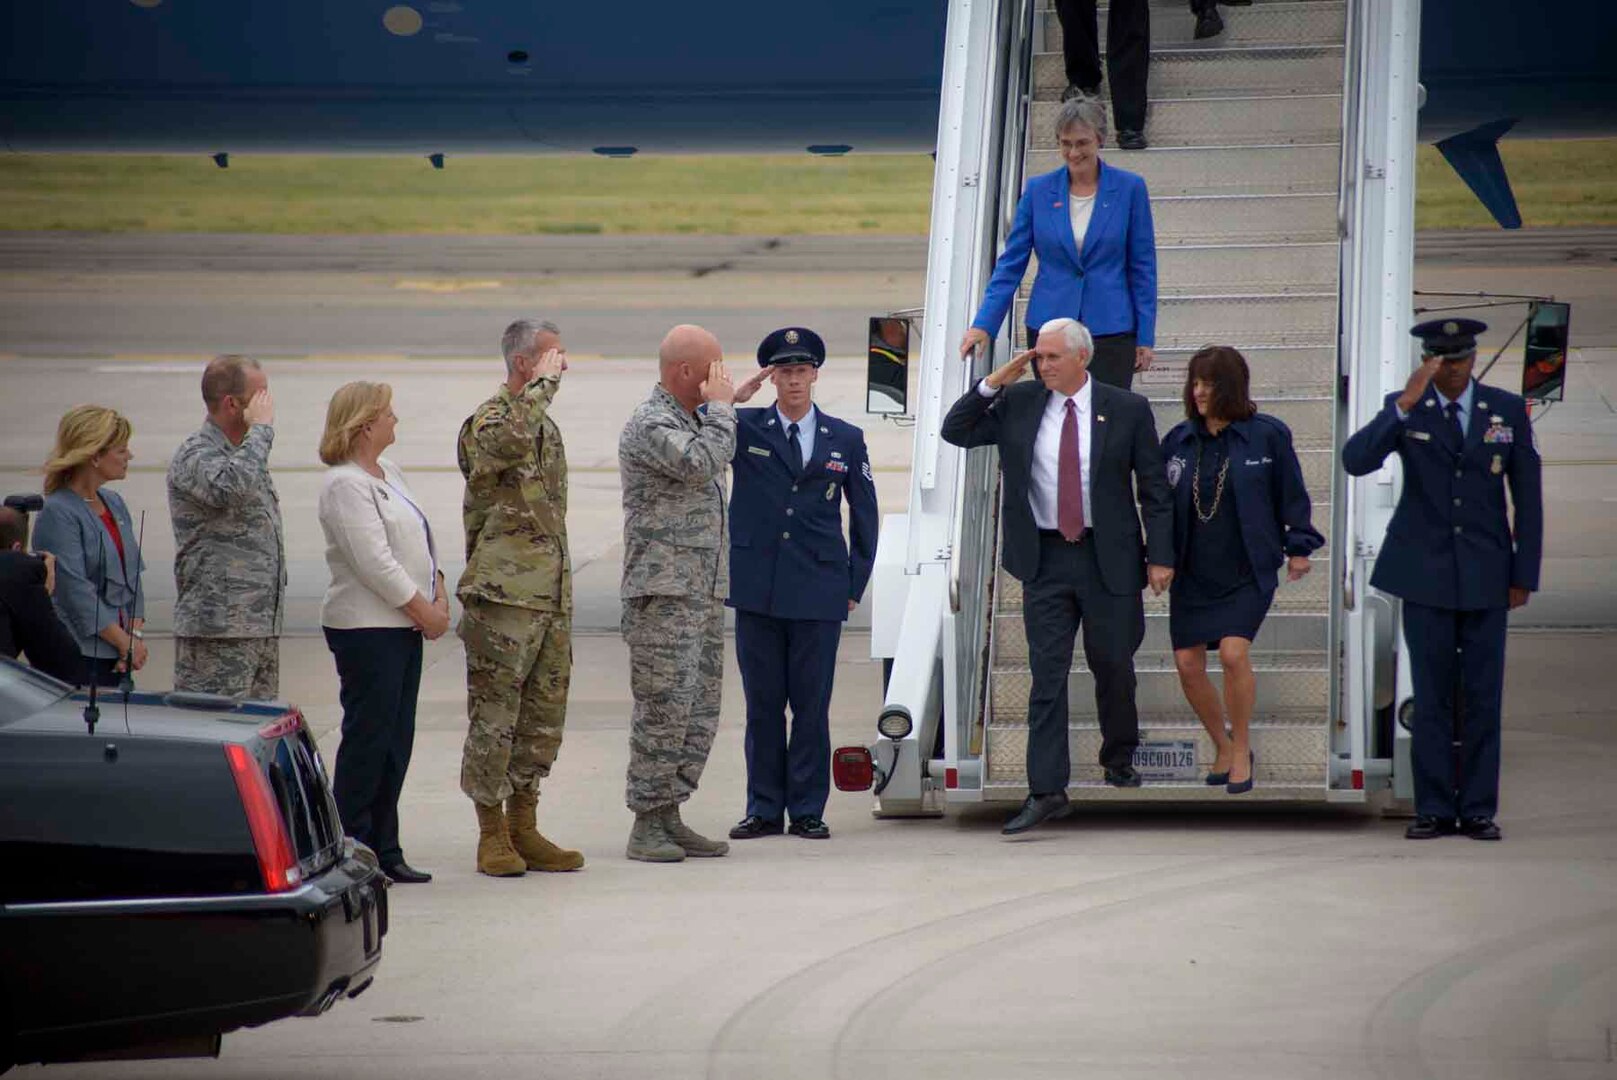 PETERSON AIR FORCE BASE, Colo. - Gen. John "Jay" Raymond, Air Force Space Command commander, greets Vice President Mike Pence alongside Karen Pence, second lady, and the Secretary of the Air Force Heather Wilson at Peterson Air Force Base, Colo., June 23, 2017. Pence traveled with Wilson as he visited Peterson AFB, Schriever AFB and Cheyenne Mountain Air Force Station, each falling under AFSPC. (U.S. Air Force photo by Senior Airman Dennis Hoffman)
